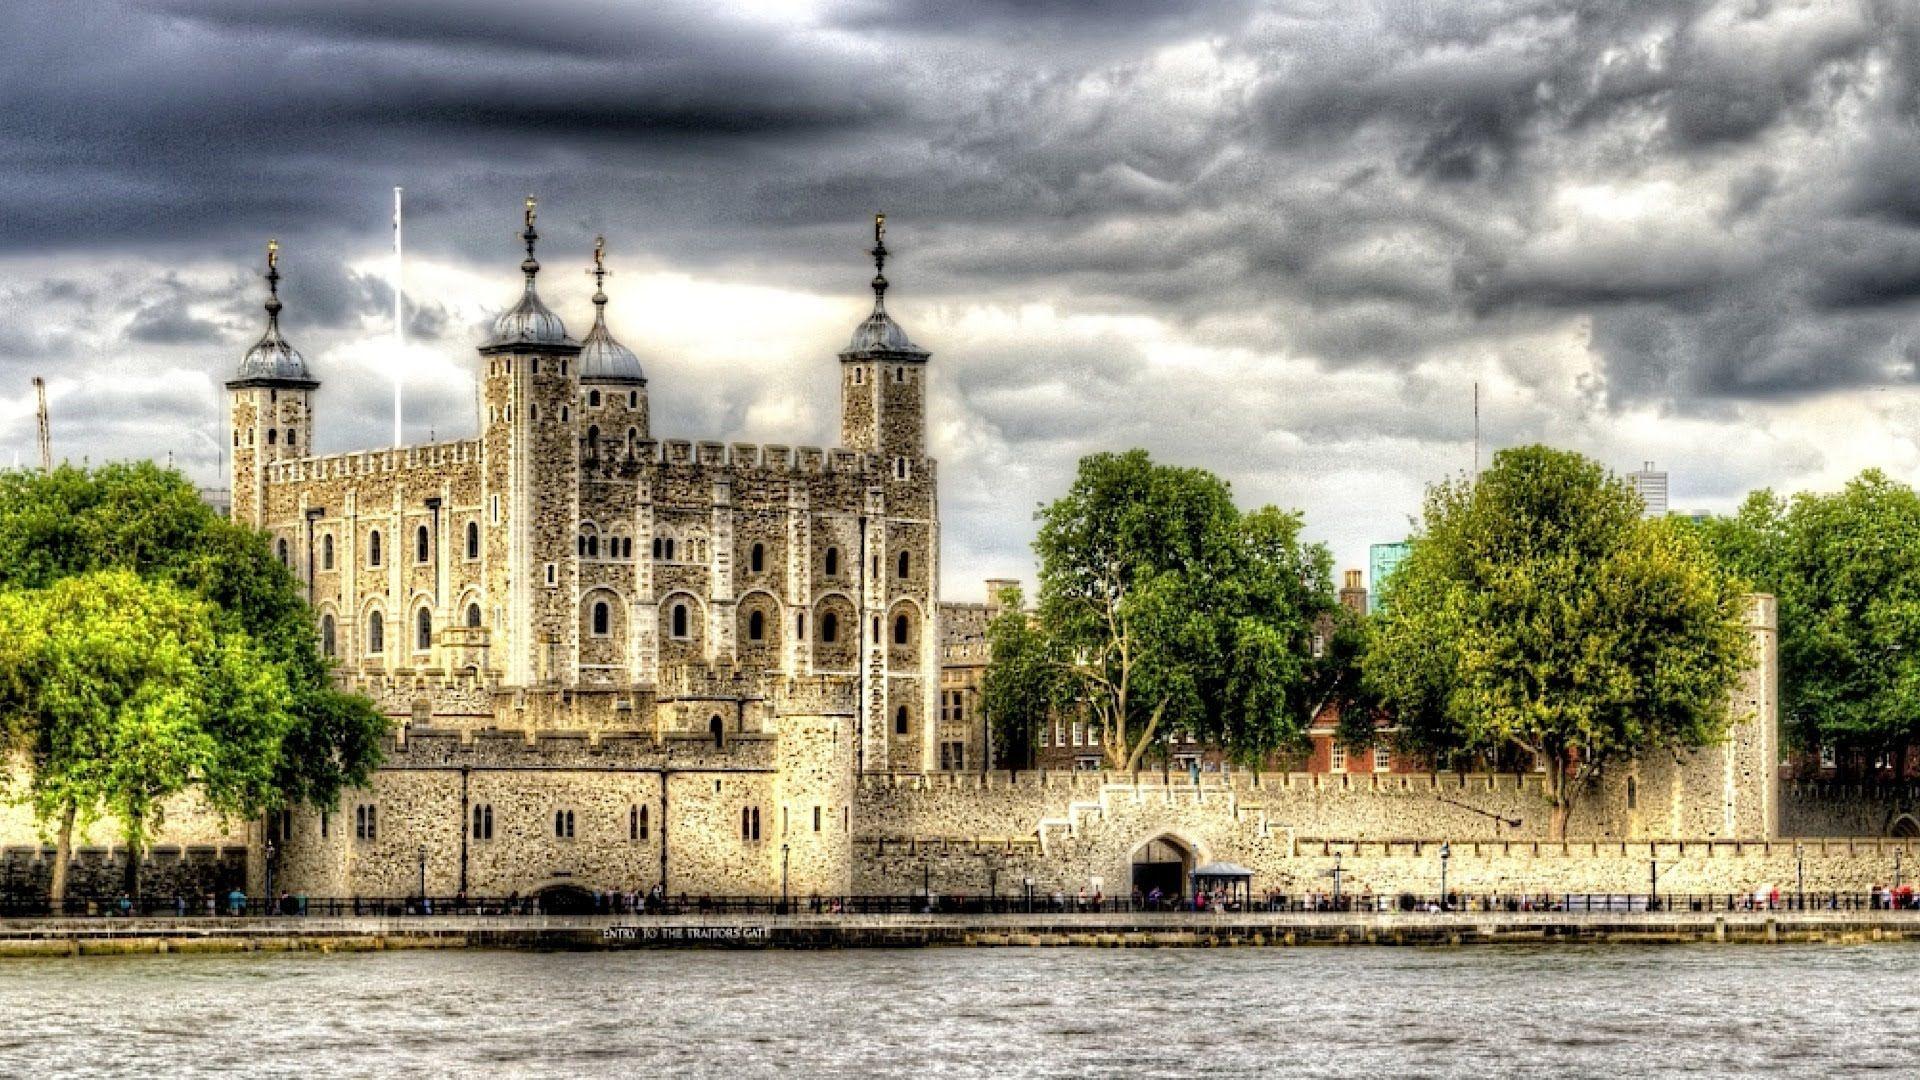 Tower of London Wallpaper Free Download